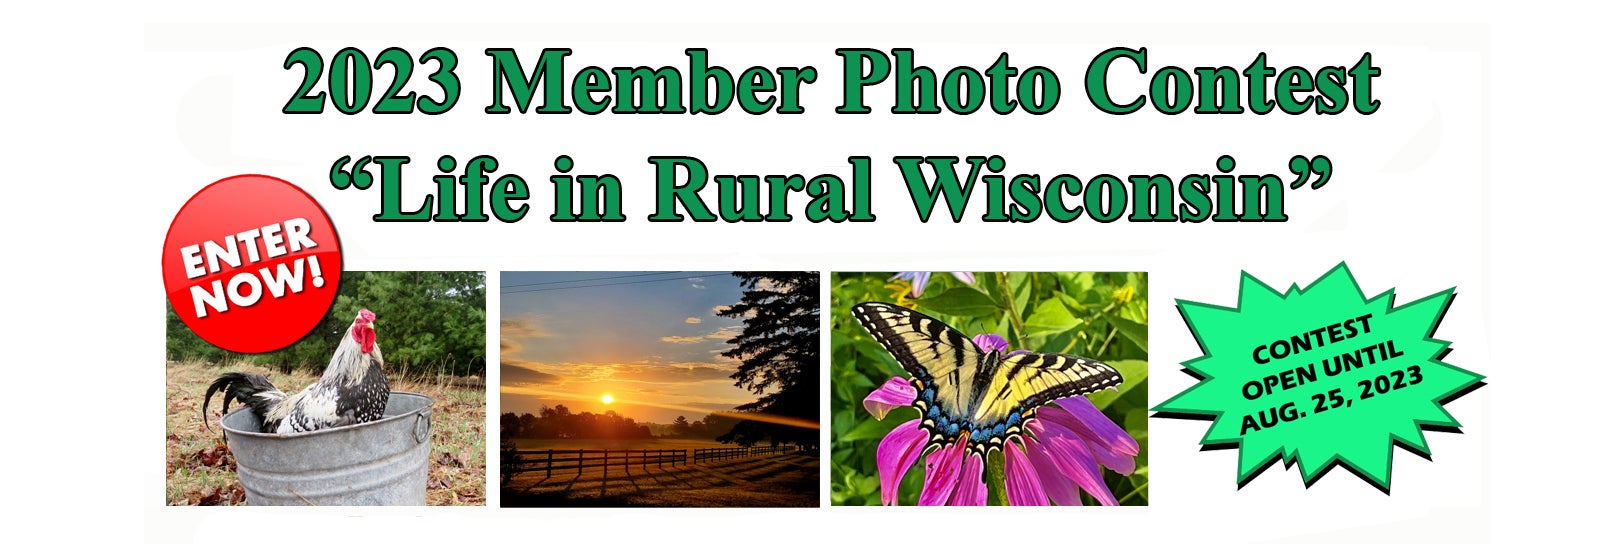 2023 Member Photo Contest information